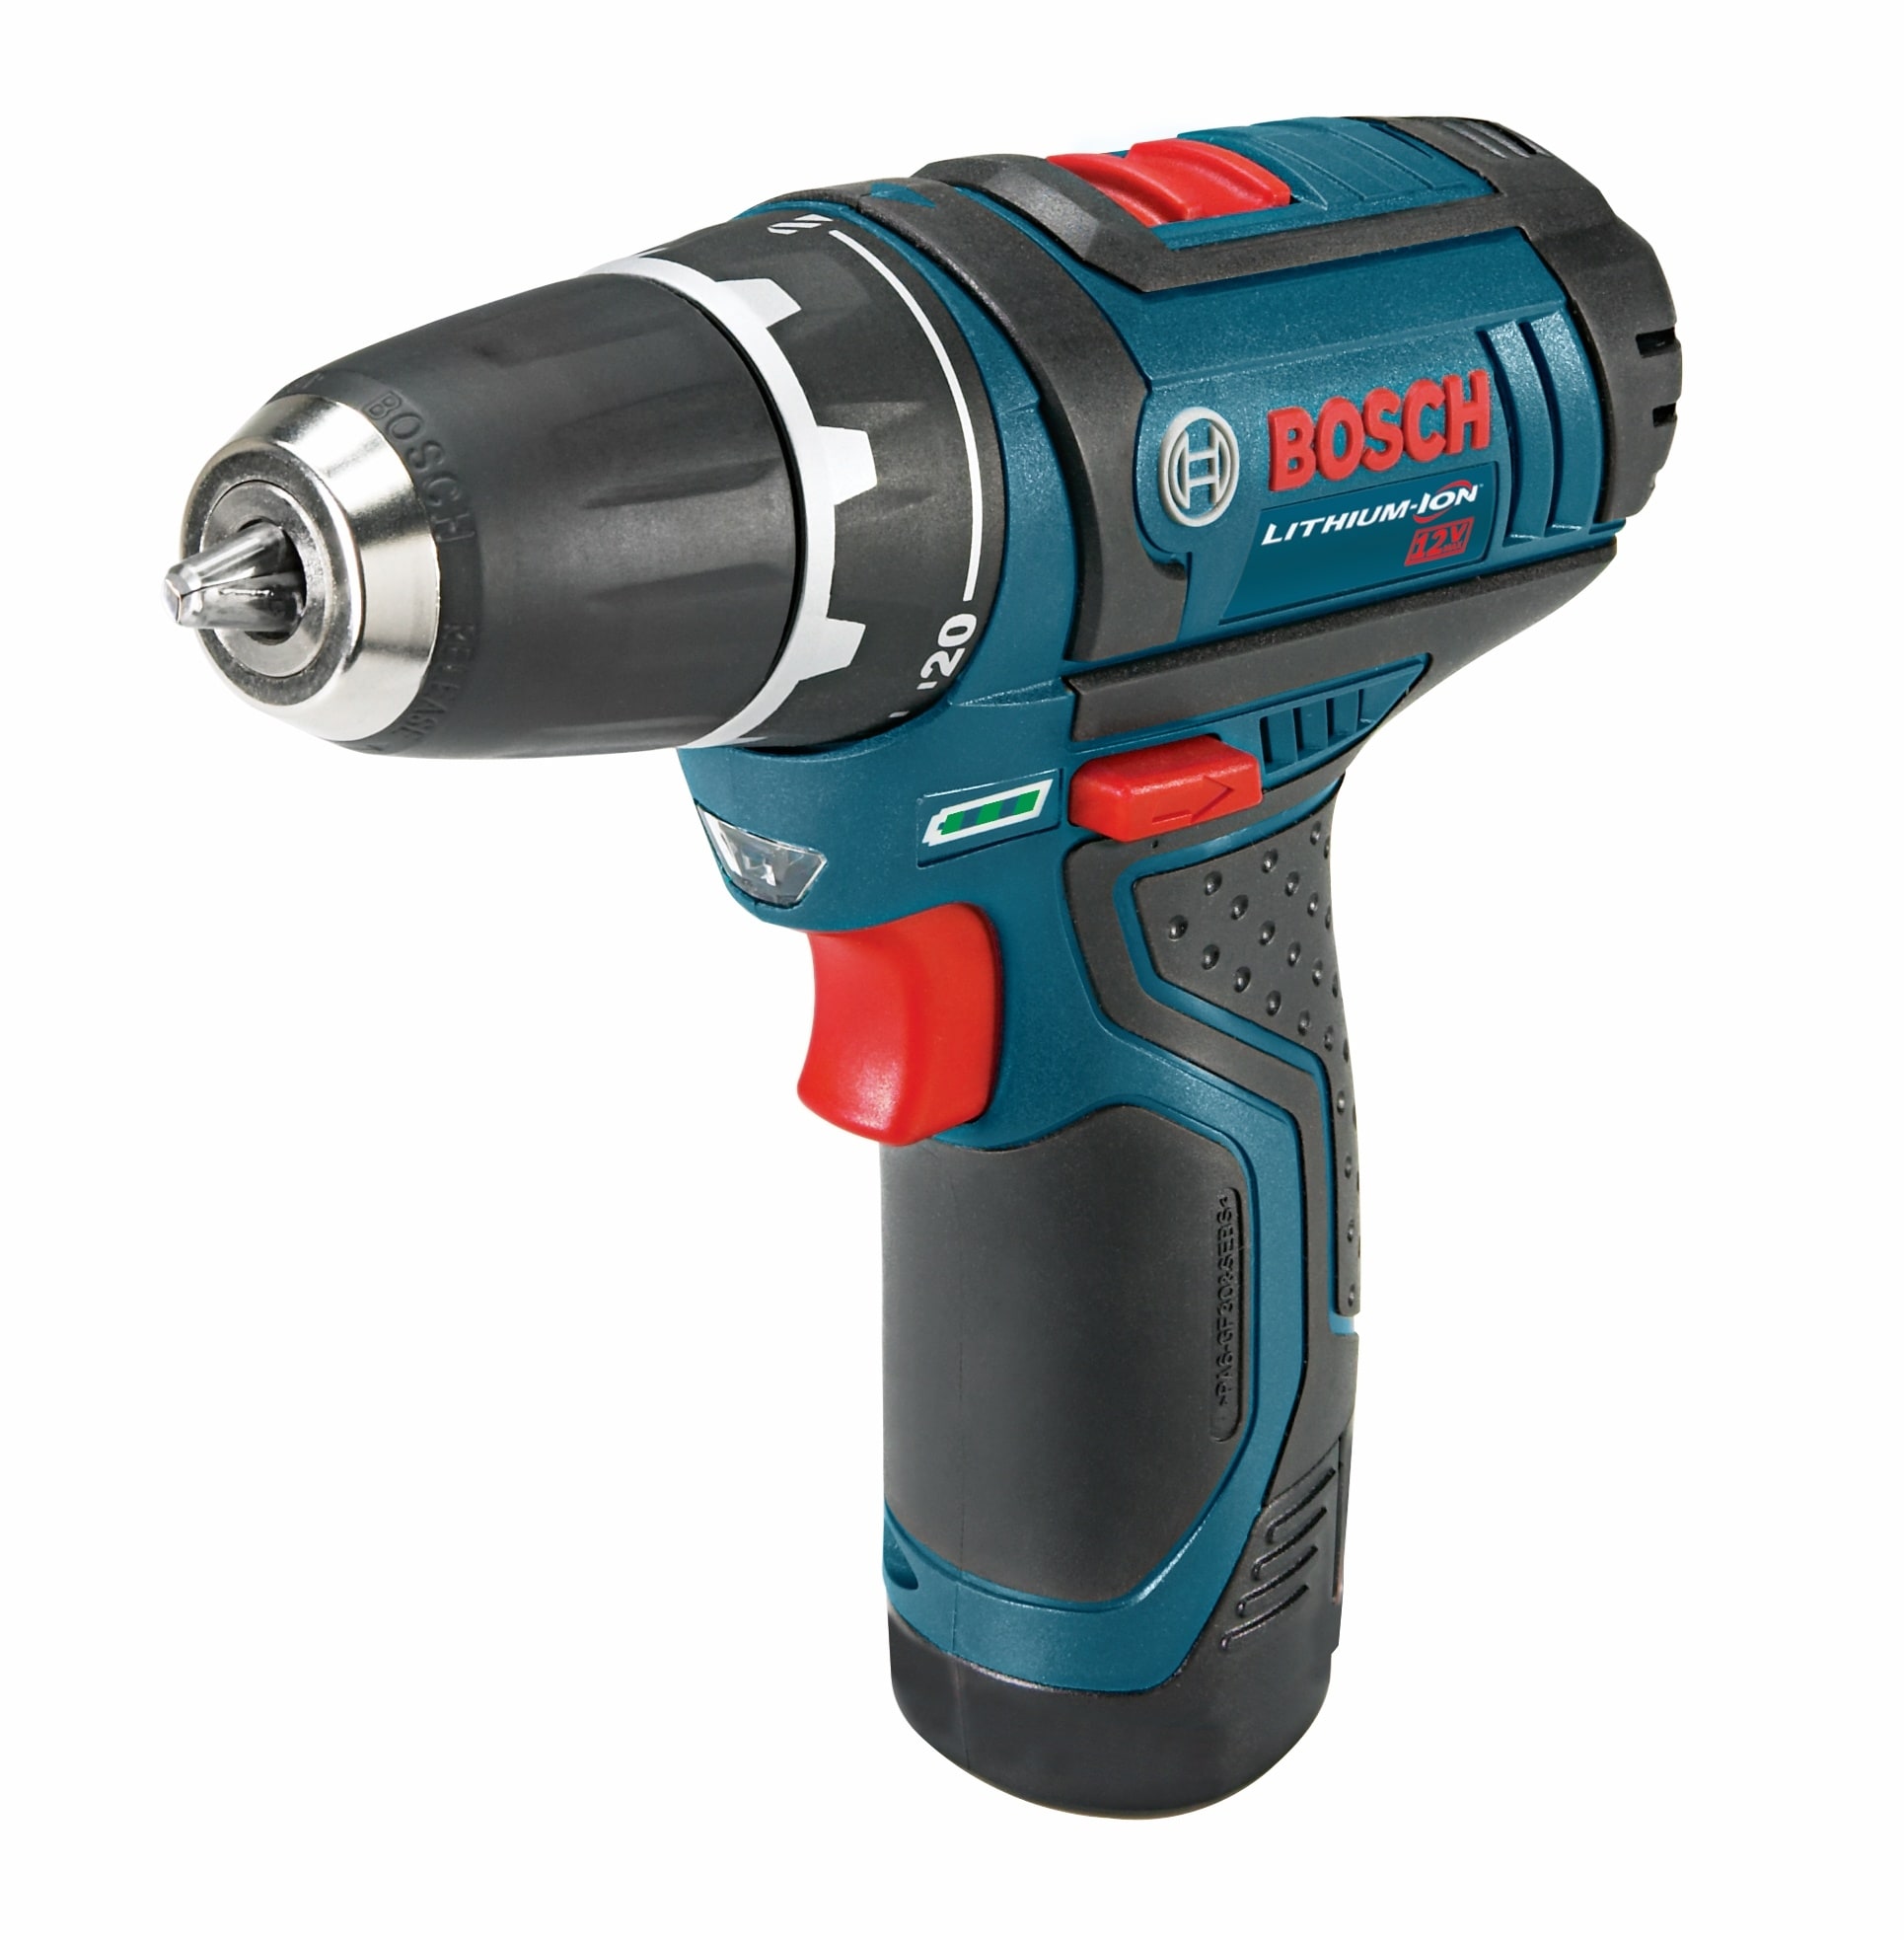 Bosch 18-volt 1/2-in Keyless Brushless Cordless Drill (2-Batteries  Included, Charger Included and Soft Bag included)